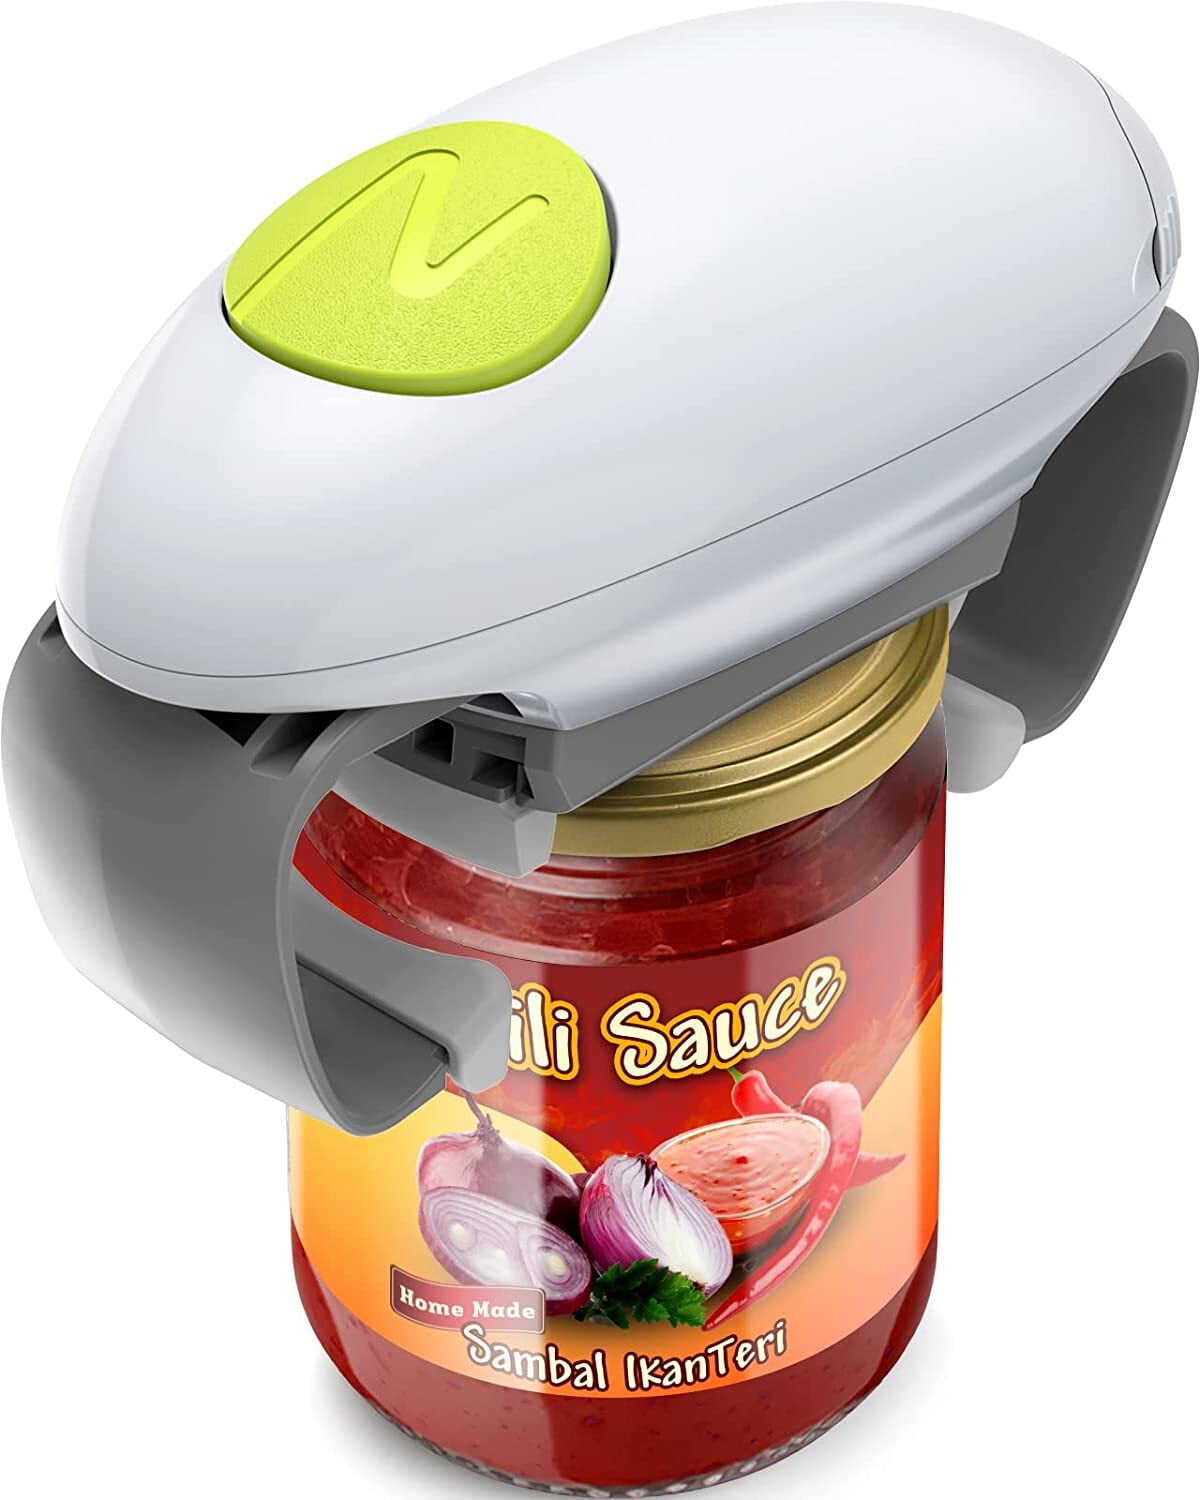 Shoppers Swear by This Electric Jar Opener—and It's on Deep Discount